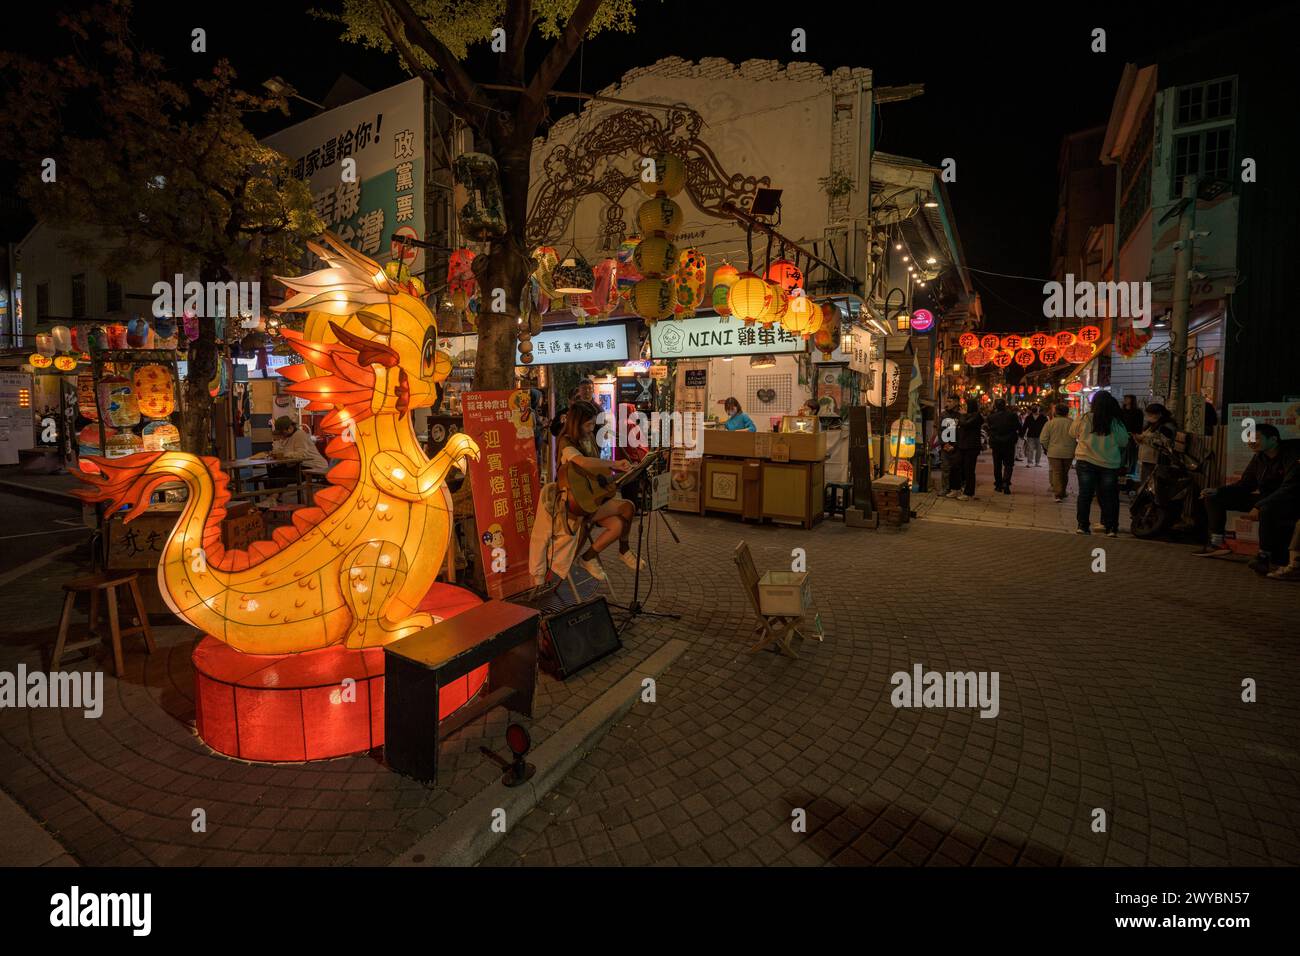 A night scene with a lantern-adorned street celebrating Asian culture, featuring a striking dragon sculpture Stock Photo